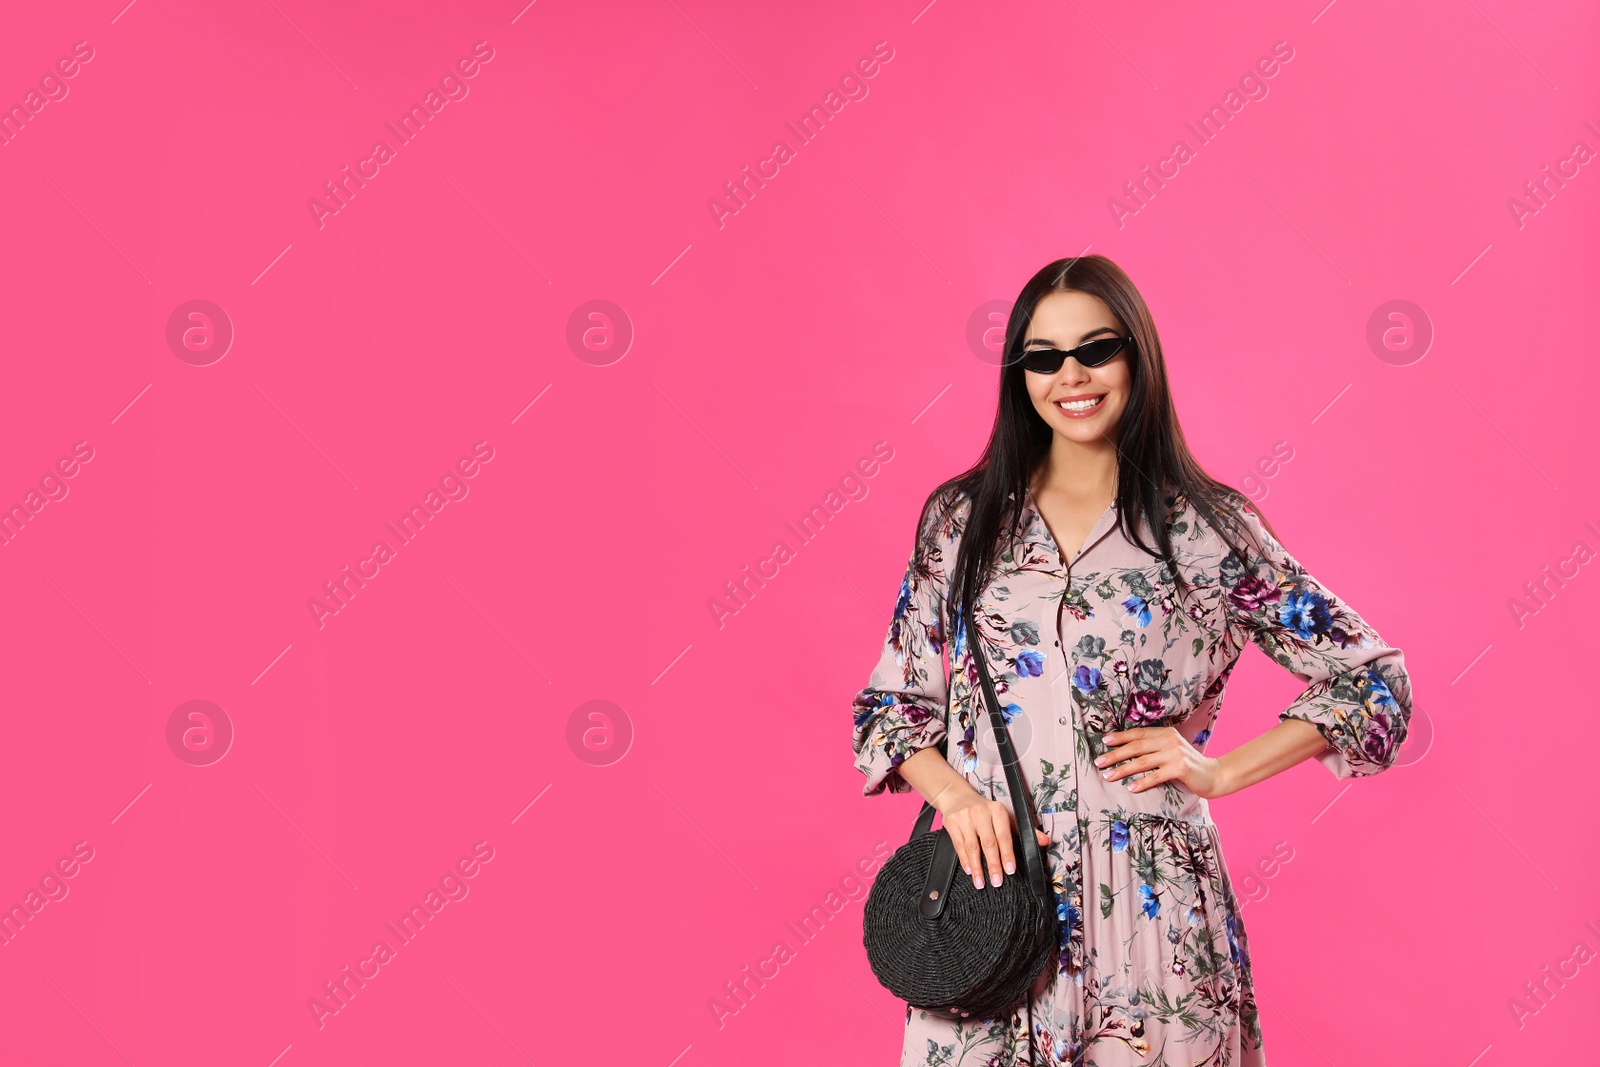 Photo of Young woman wearing floral print dress and sunglasses on pink background. Space for text